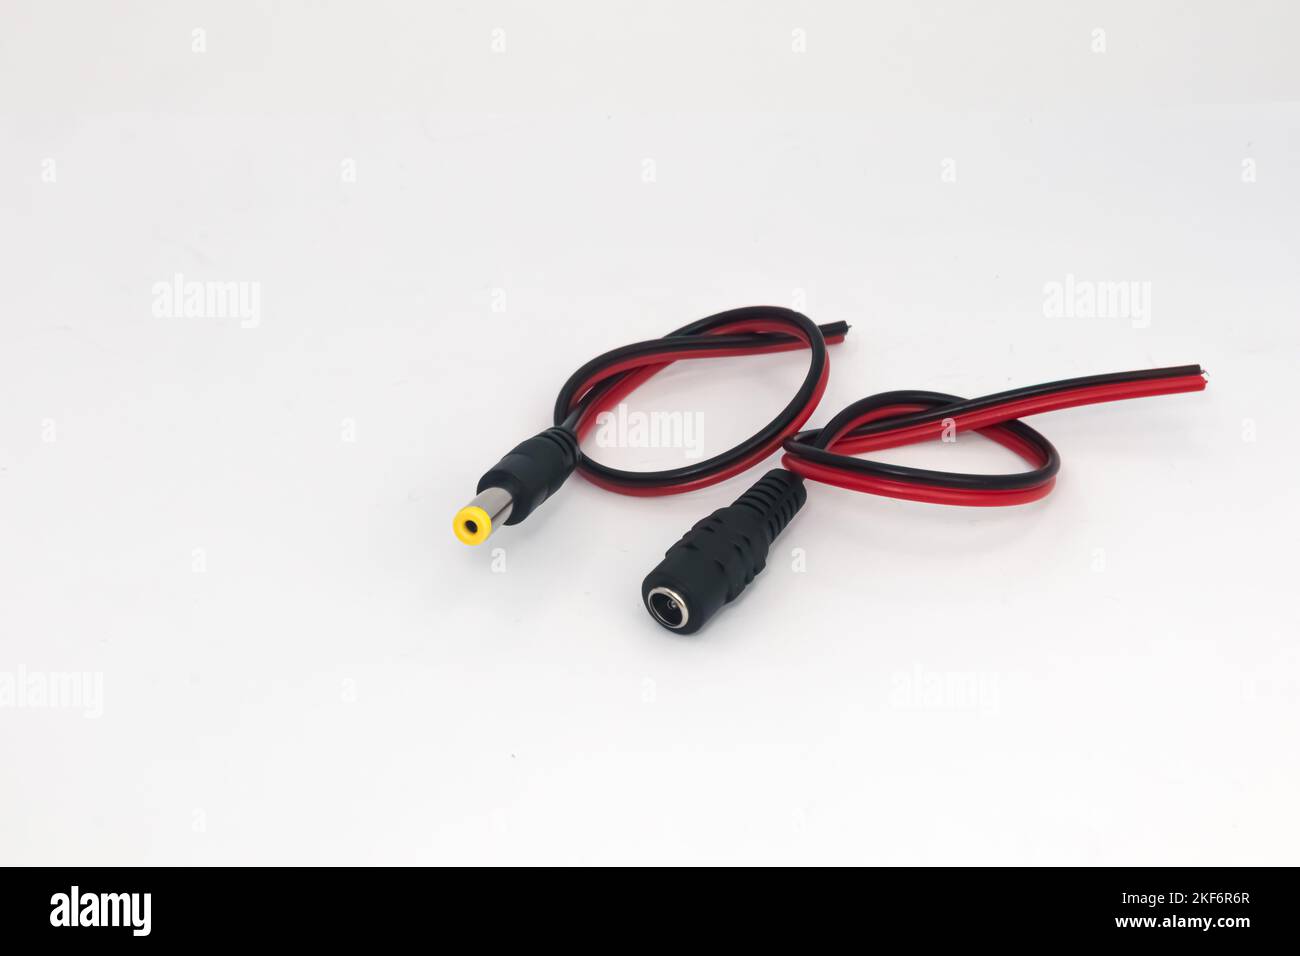 DC 12V male and female connector cables on a white background. Electronic parts used by hobbyists as battery connectors. Stock Photo